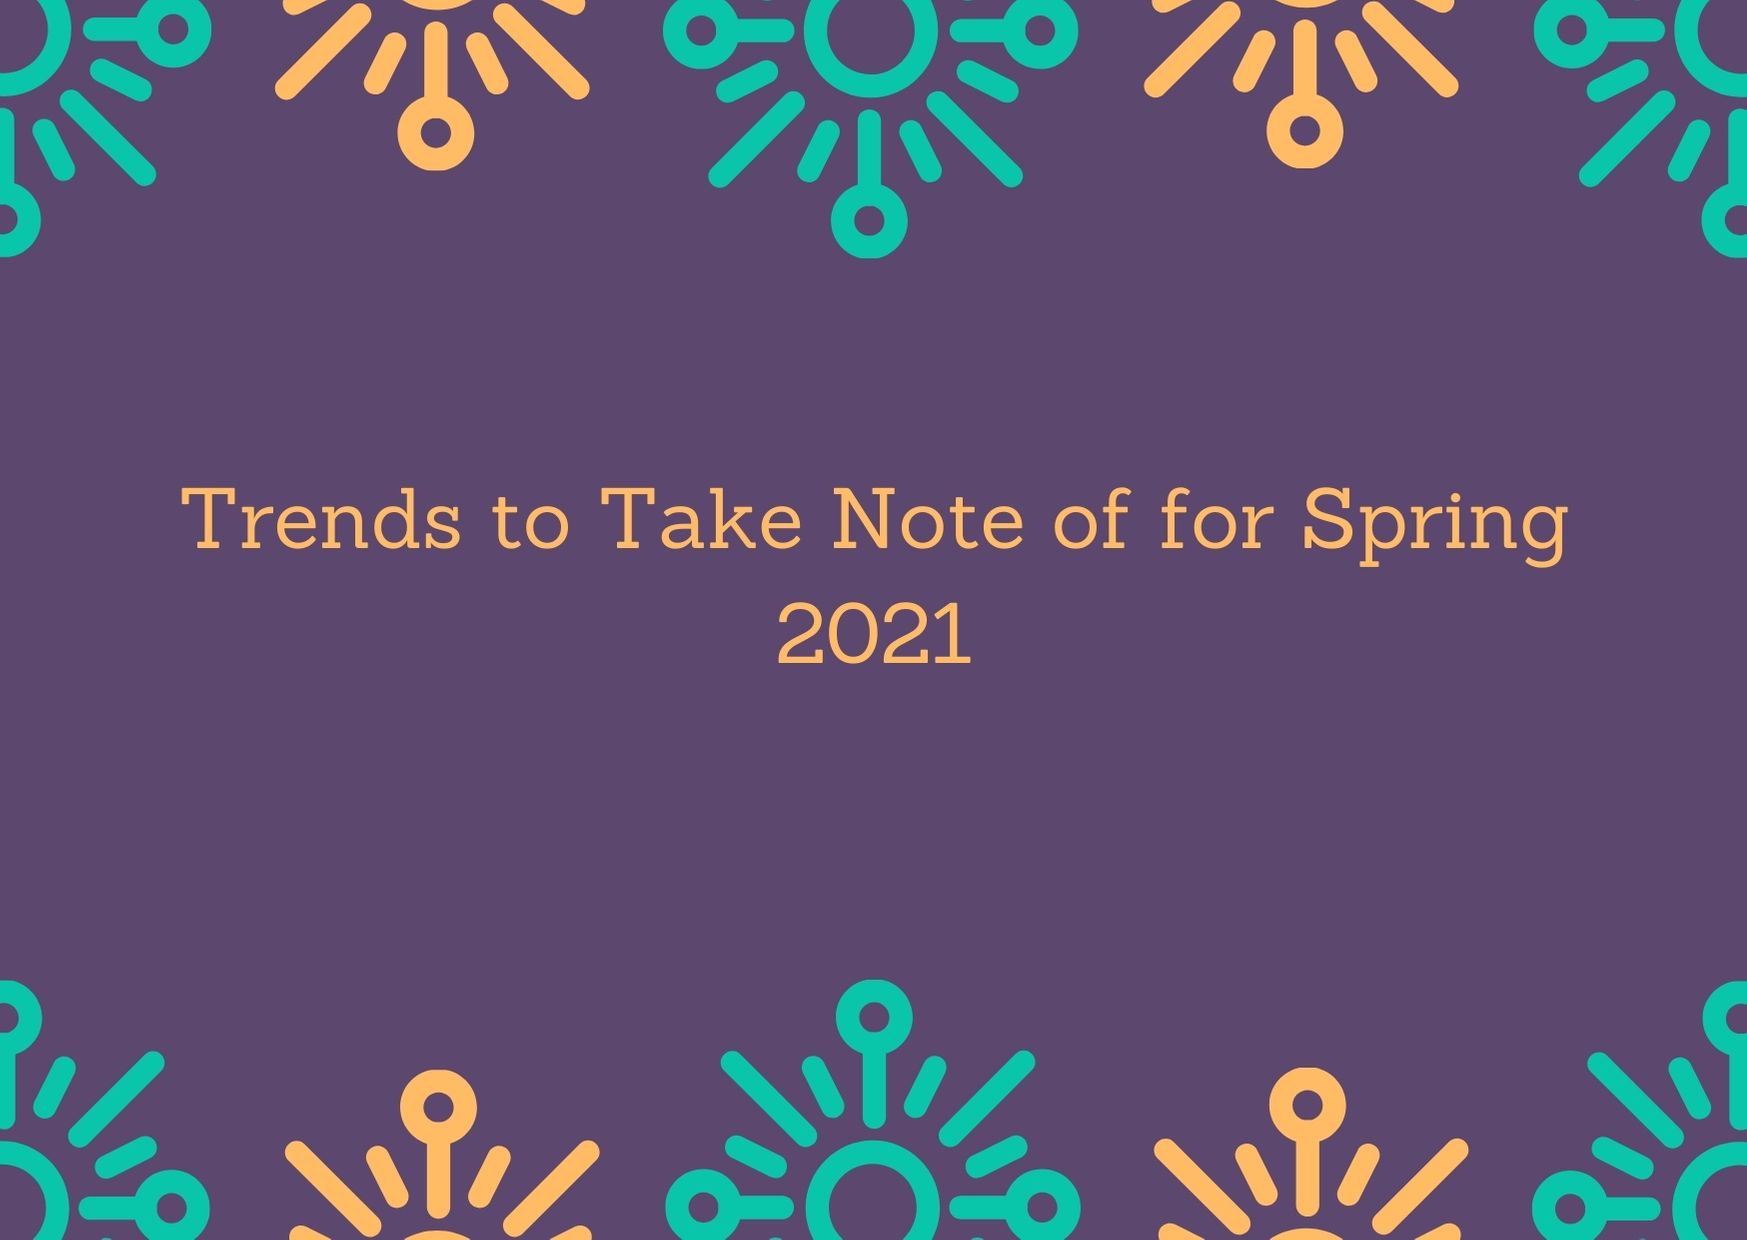 Trends to Take Note of for Spring 2021